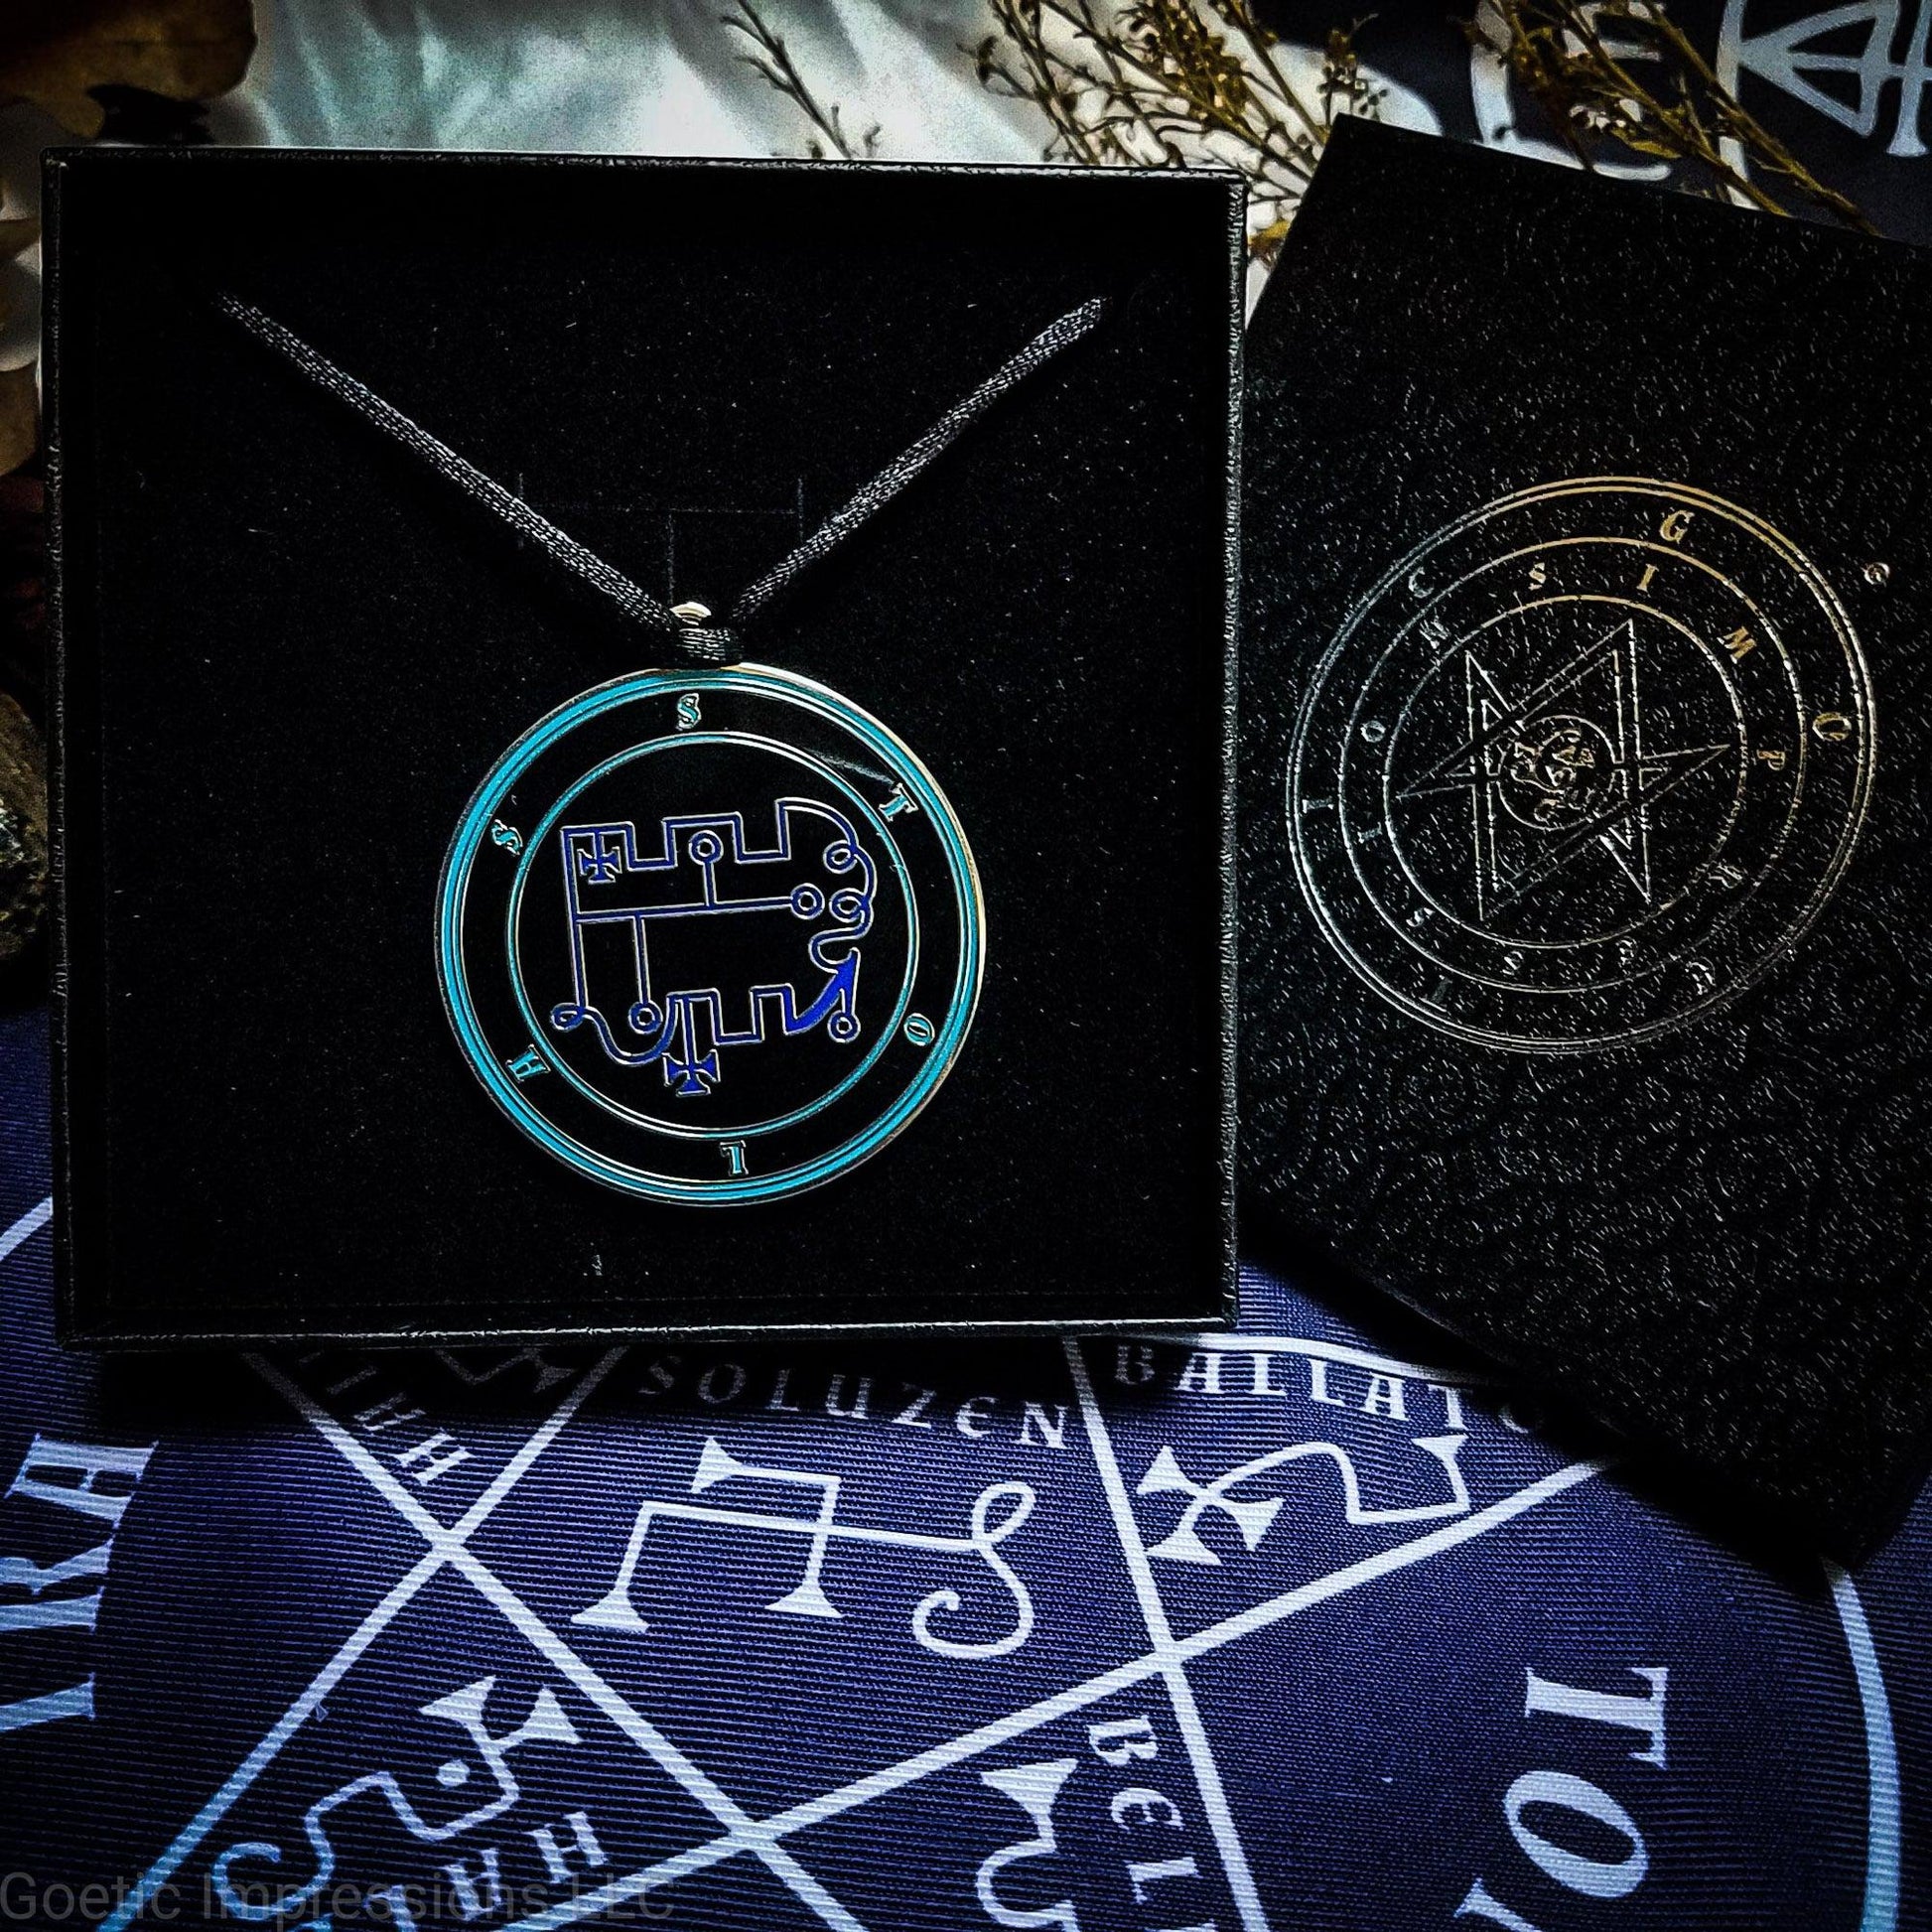 Necklace of Stolas in a Goetic Impressions gift box stamped in silver foil. The sigil for Stolas is dark blue. Stolas' name is surrounding the sigil with concentric circles in teal on a black background. The seal is silver plated. The box is on a purple altar cloth with the Tetragrammaton in white.